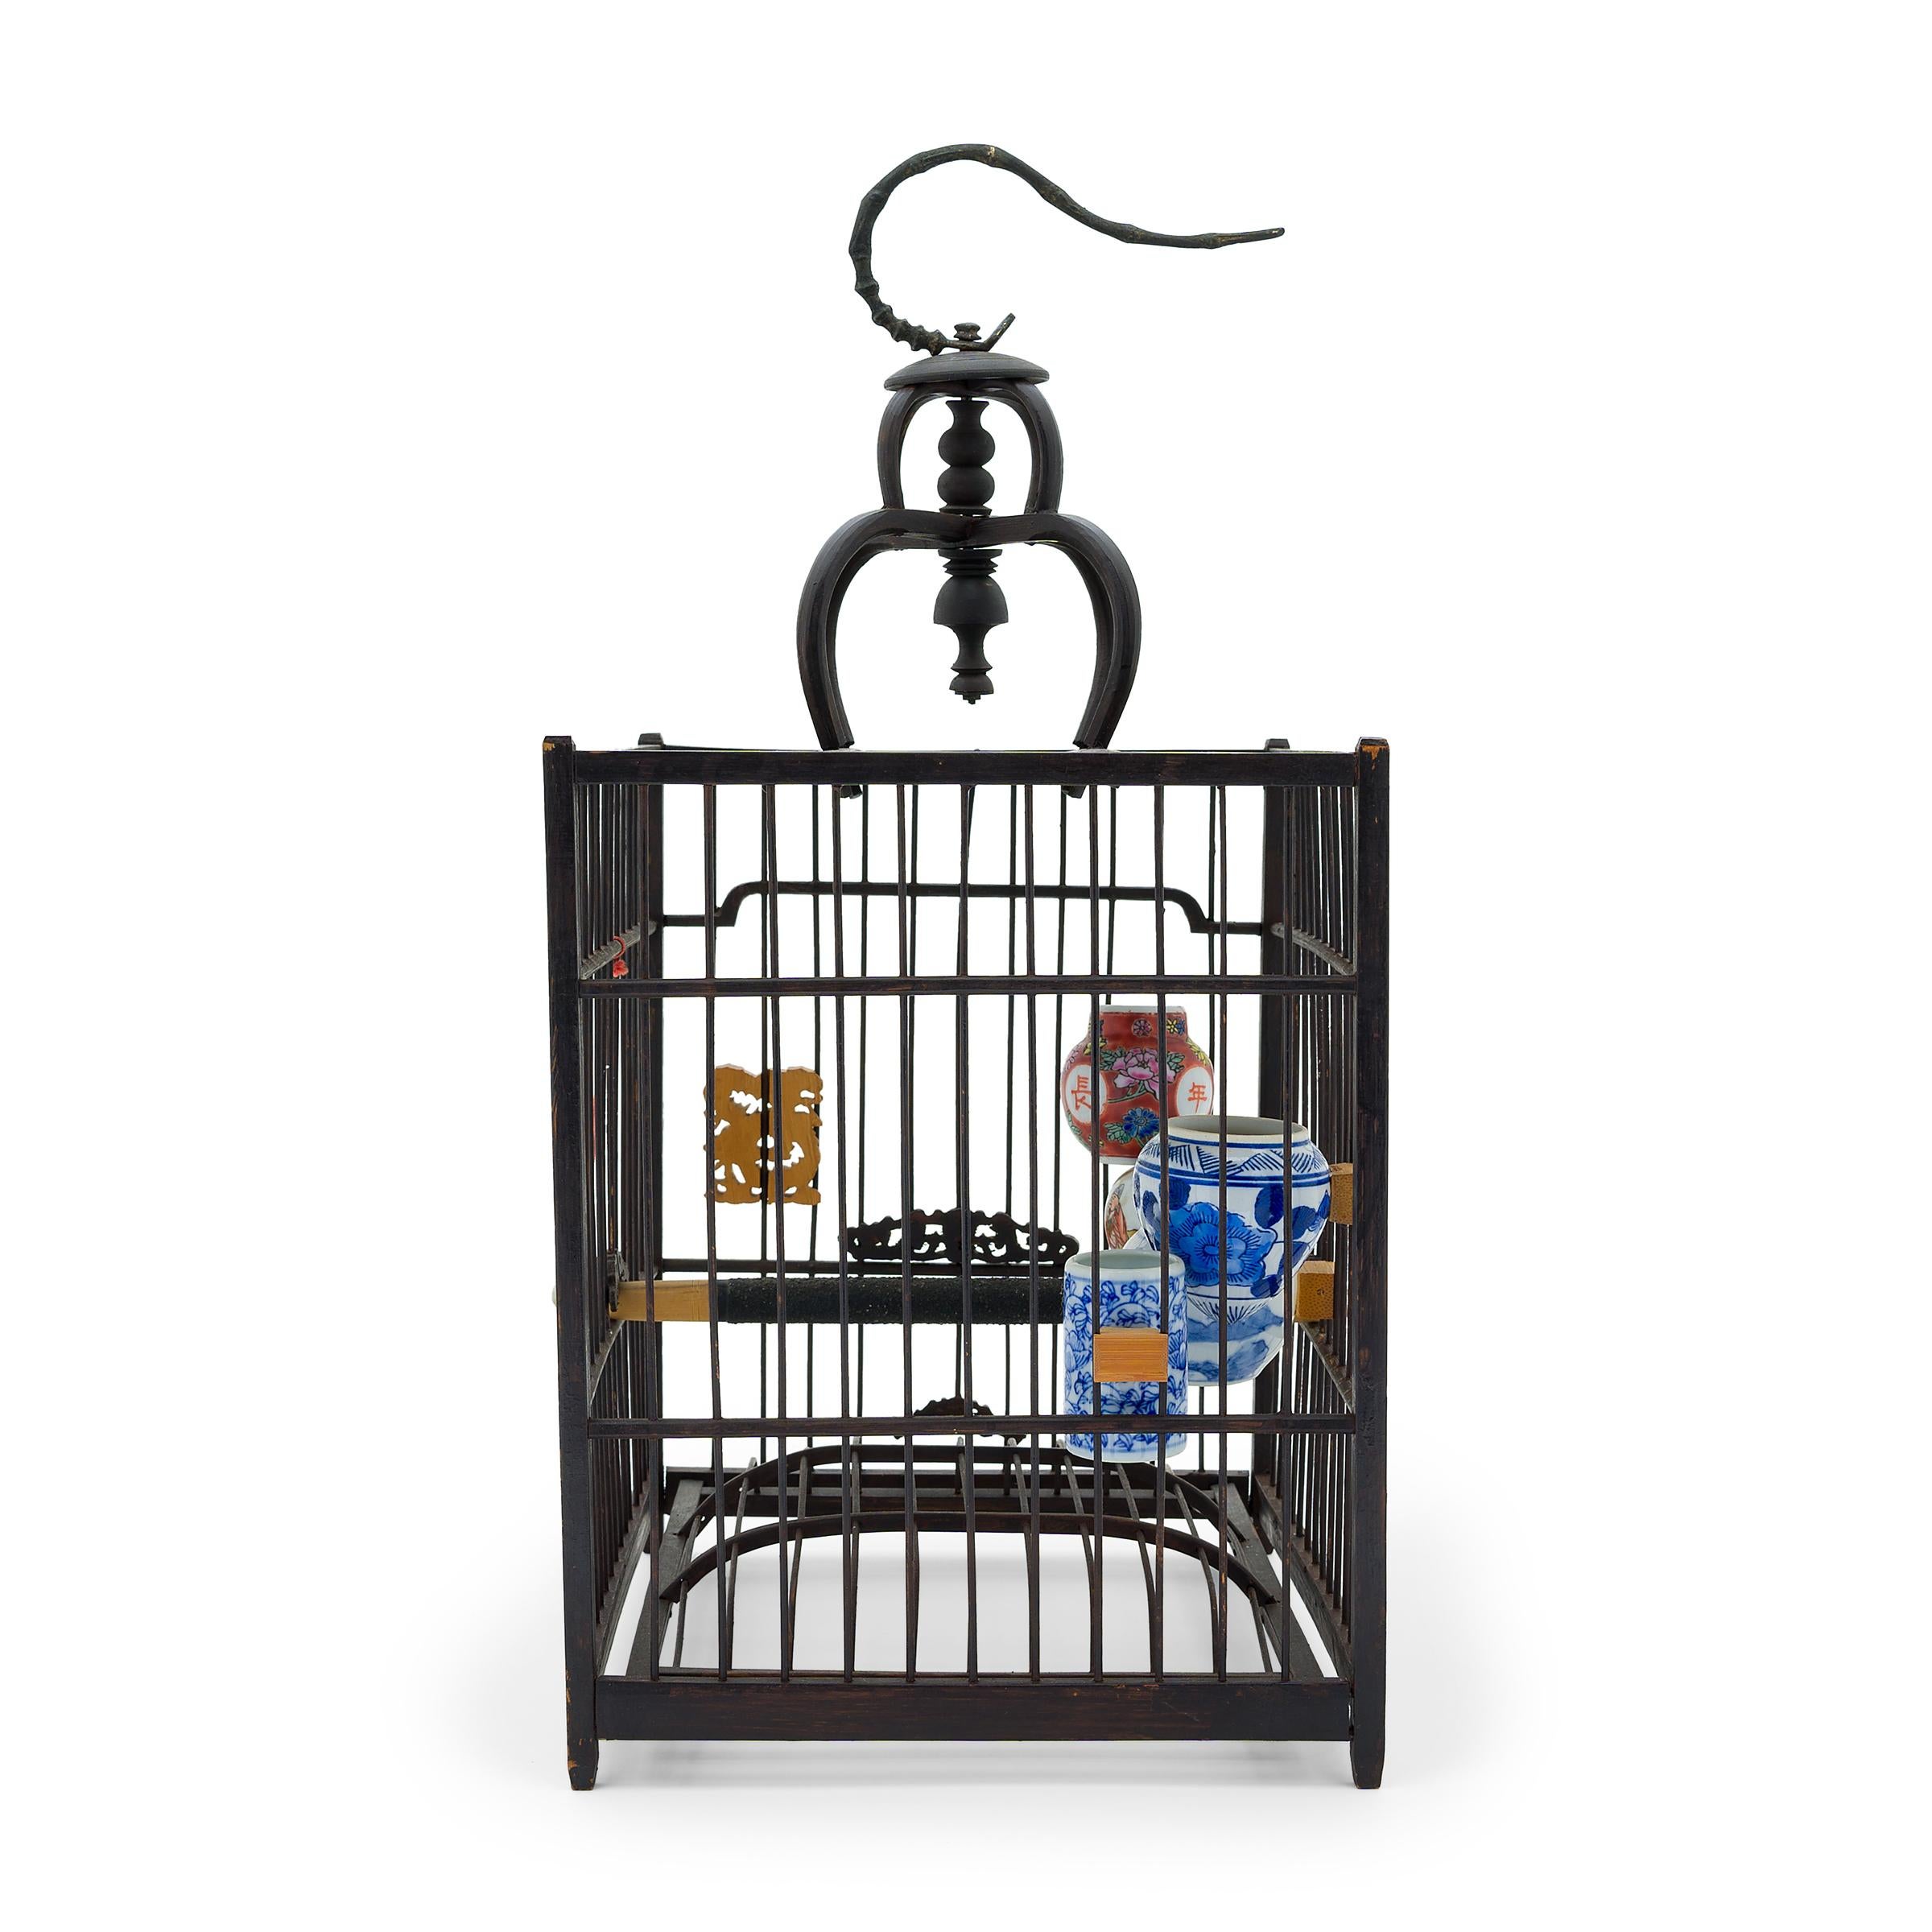 This delicate wooden birdcage was once home to the tiny pet bird of a Qing-dynasty aristocrat. Dated to the Mid-19th Century, the square cage is precisely assembled from thin bamboo rods and has a removable base, a large metal hook, and a sliding